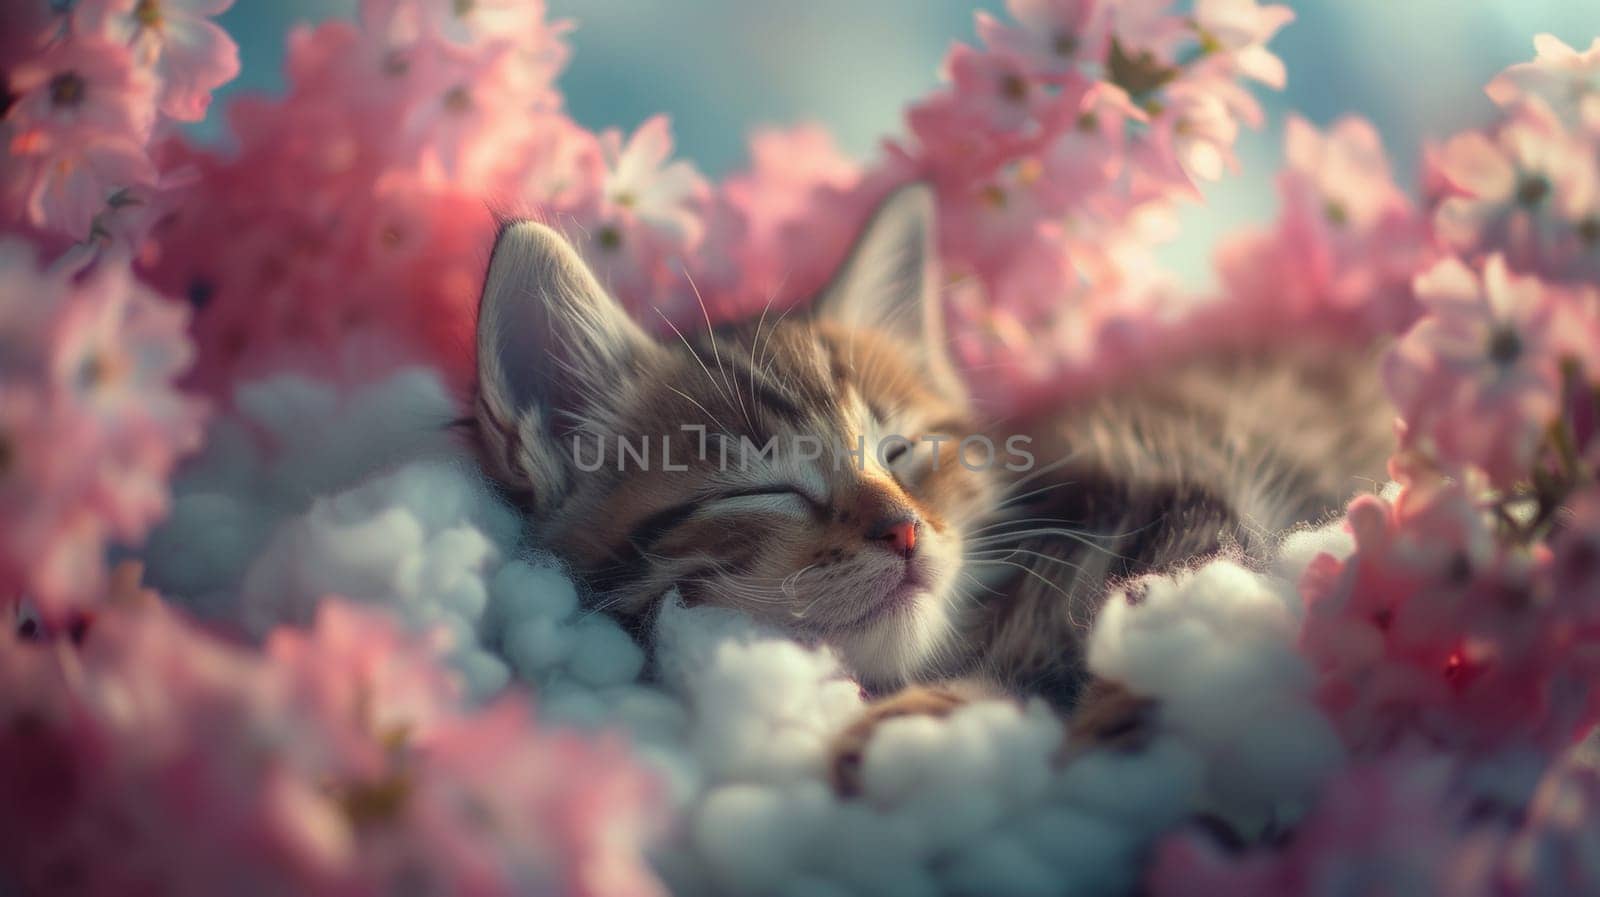 A cat sleeping in a field of flowers with pink petals